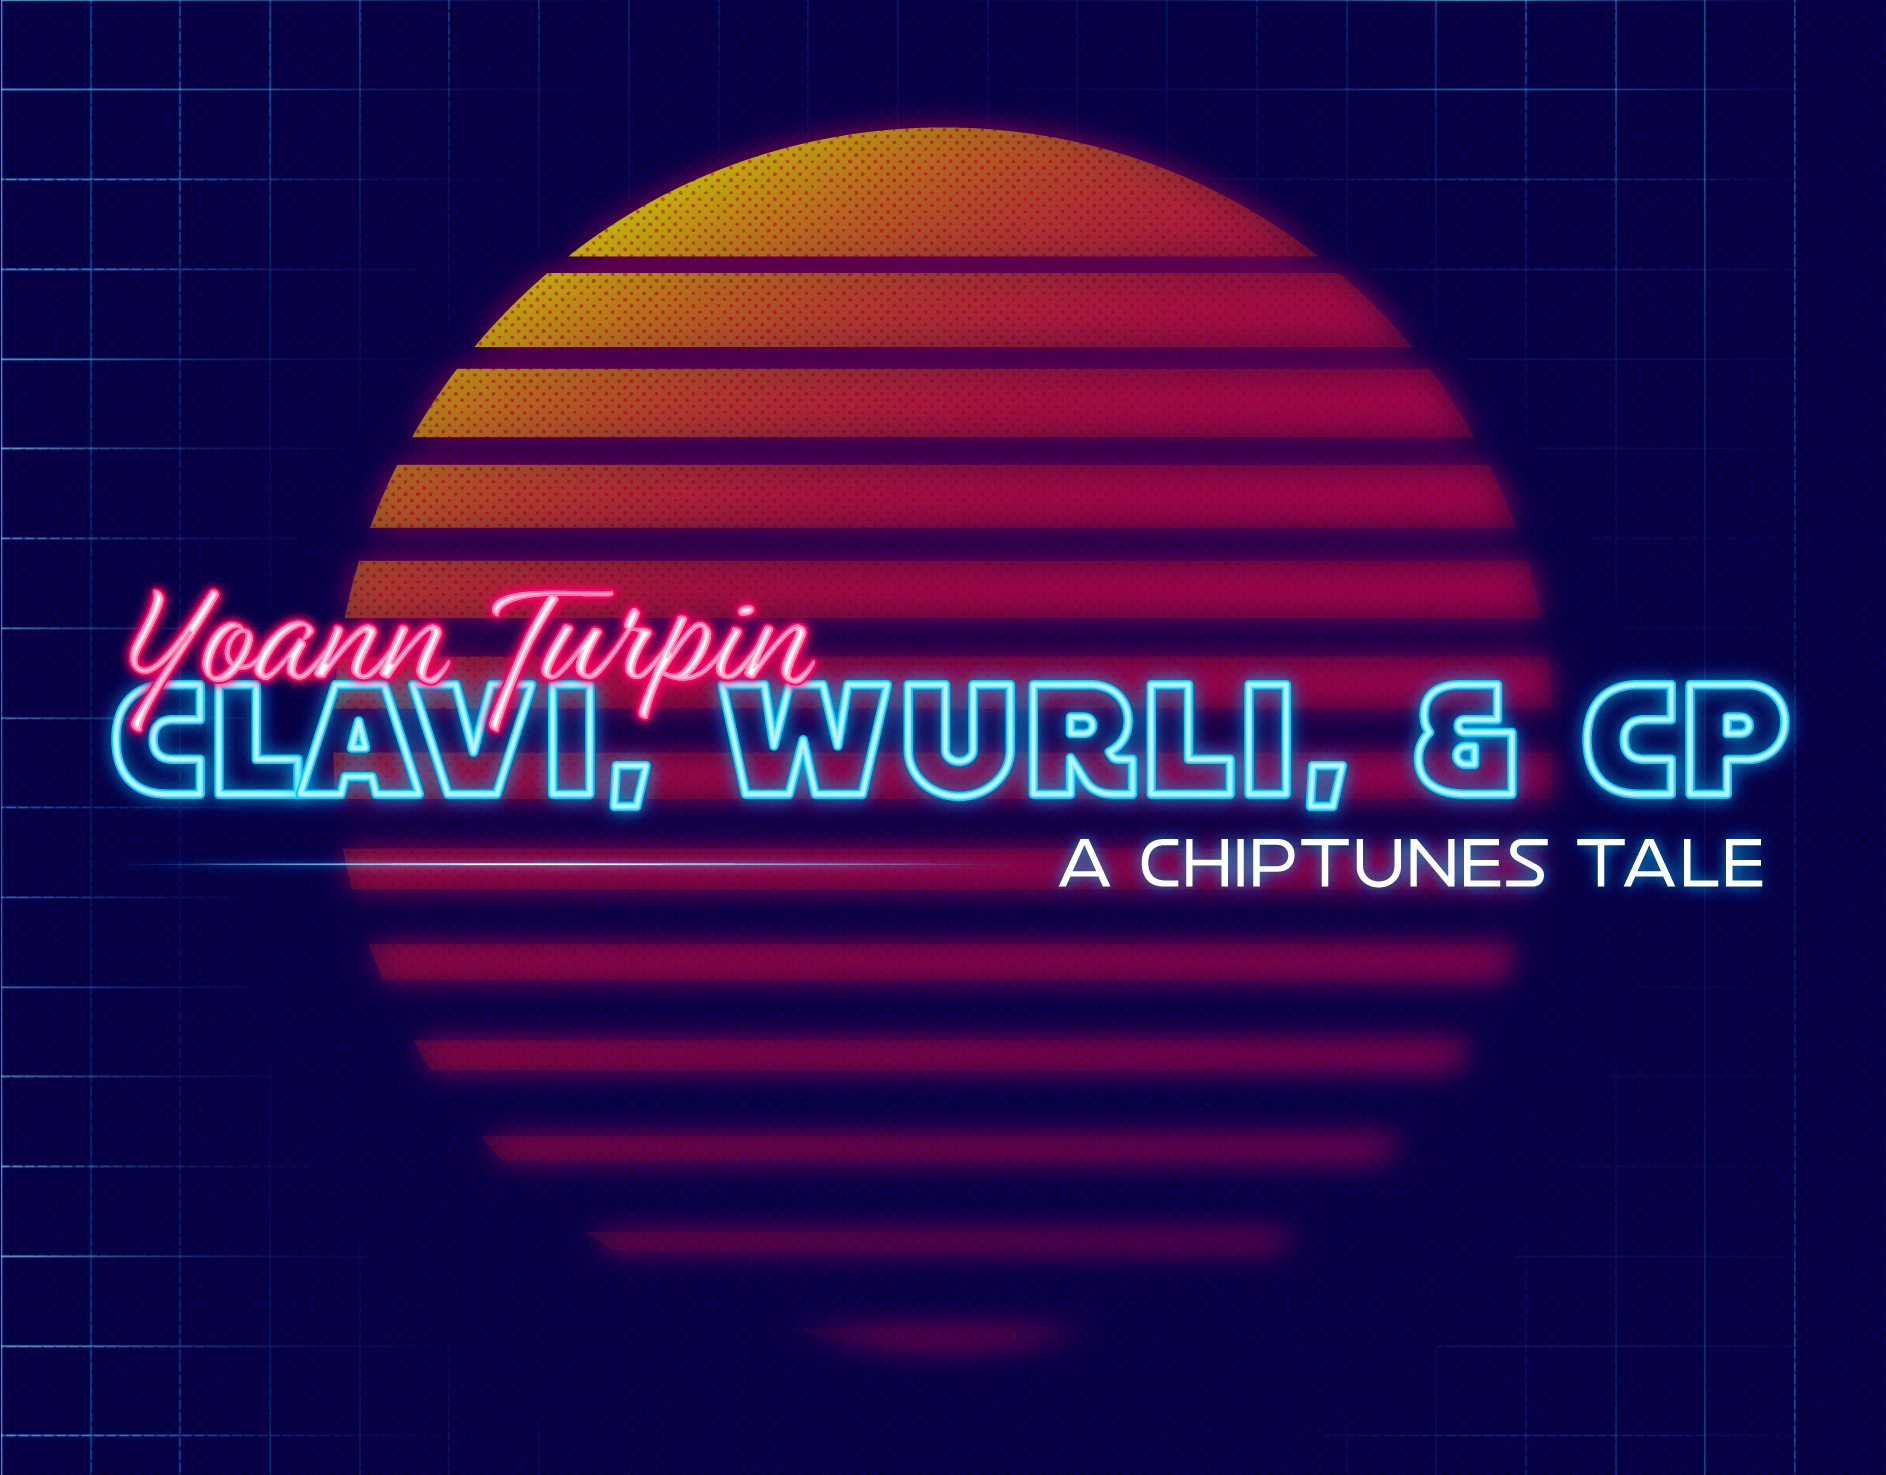 Clavi, Wurly & CP: A Chiptunes Tale | Yoann Turpin. May 2020